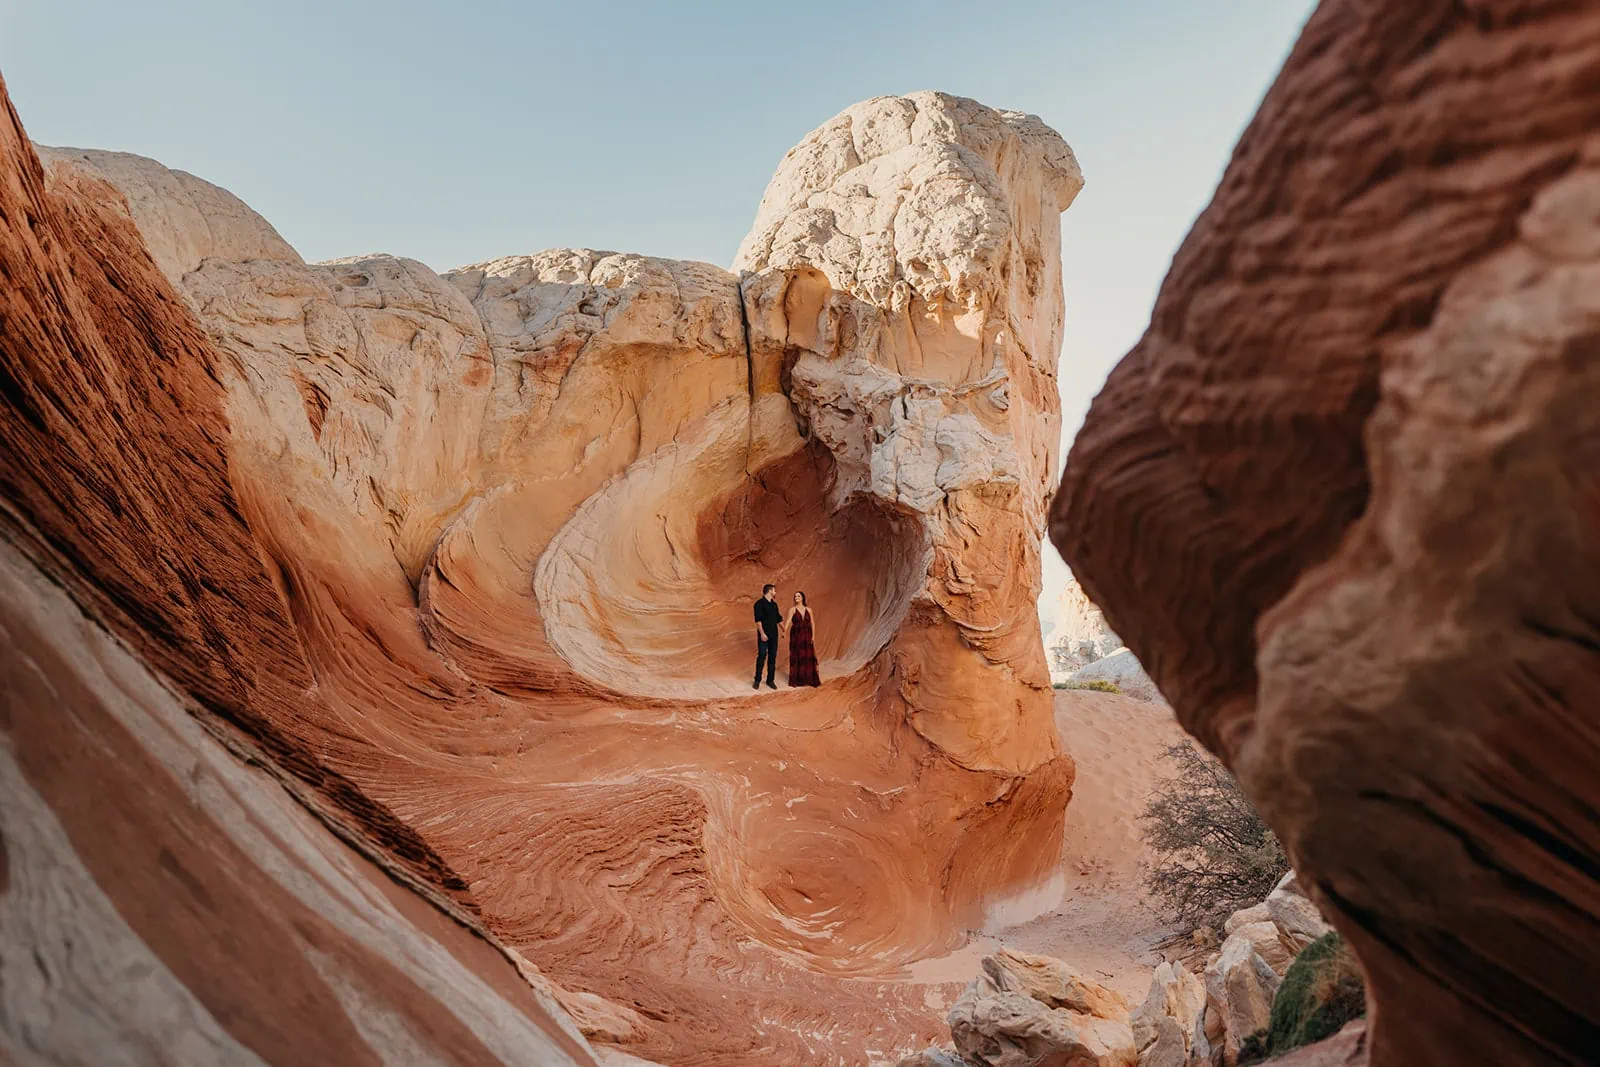 A couple stands in a colorful swirly rock formation.